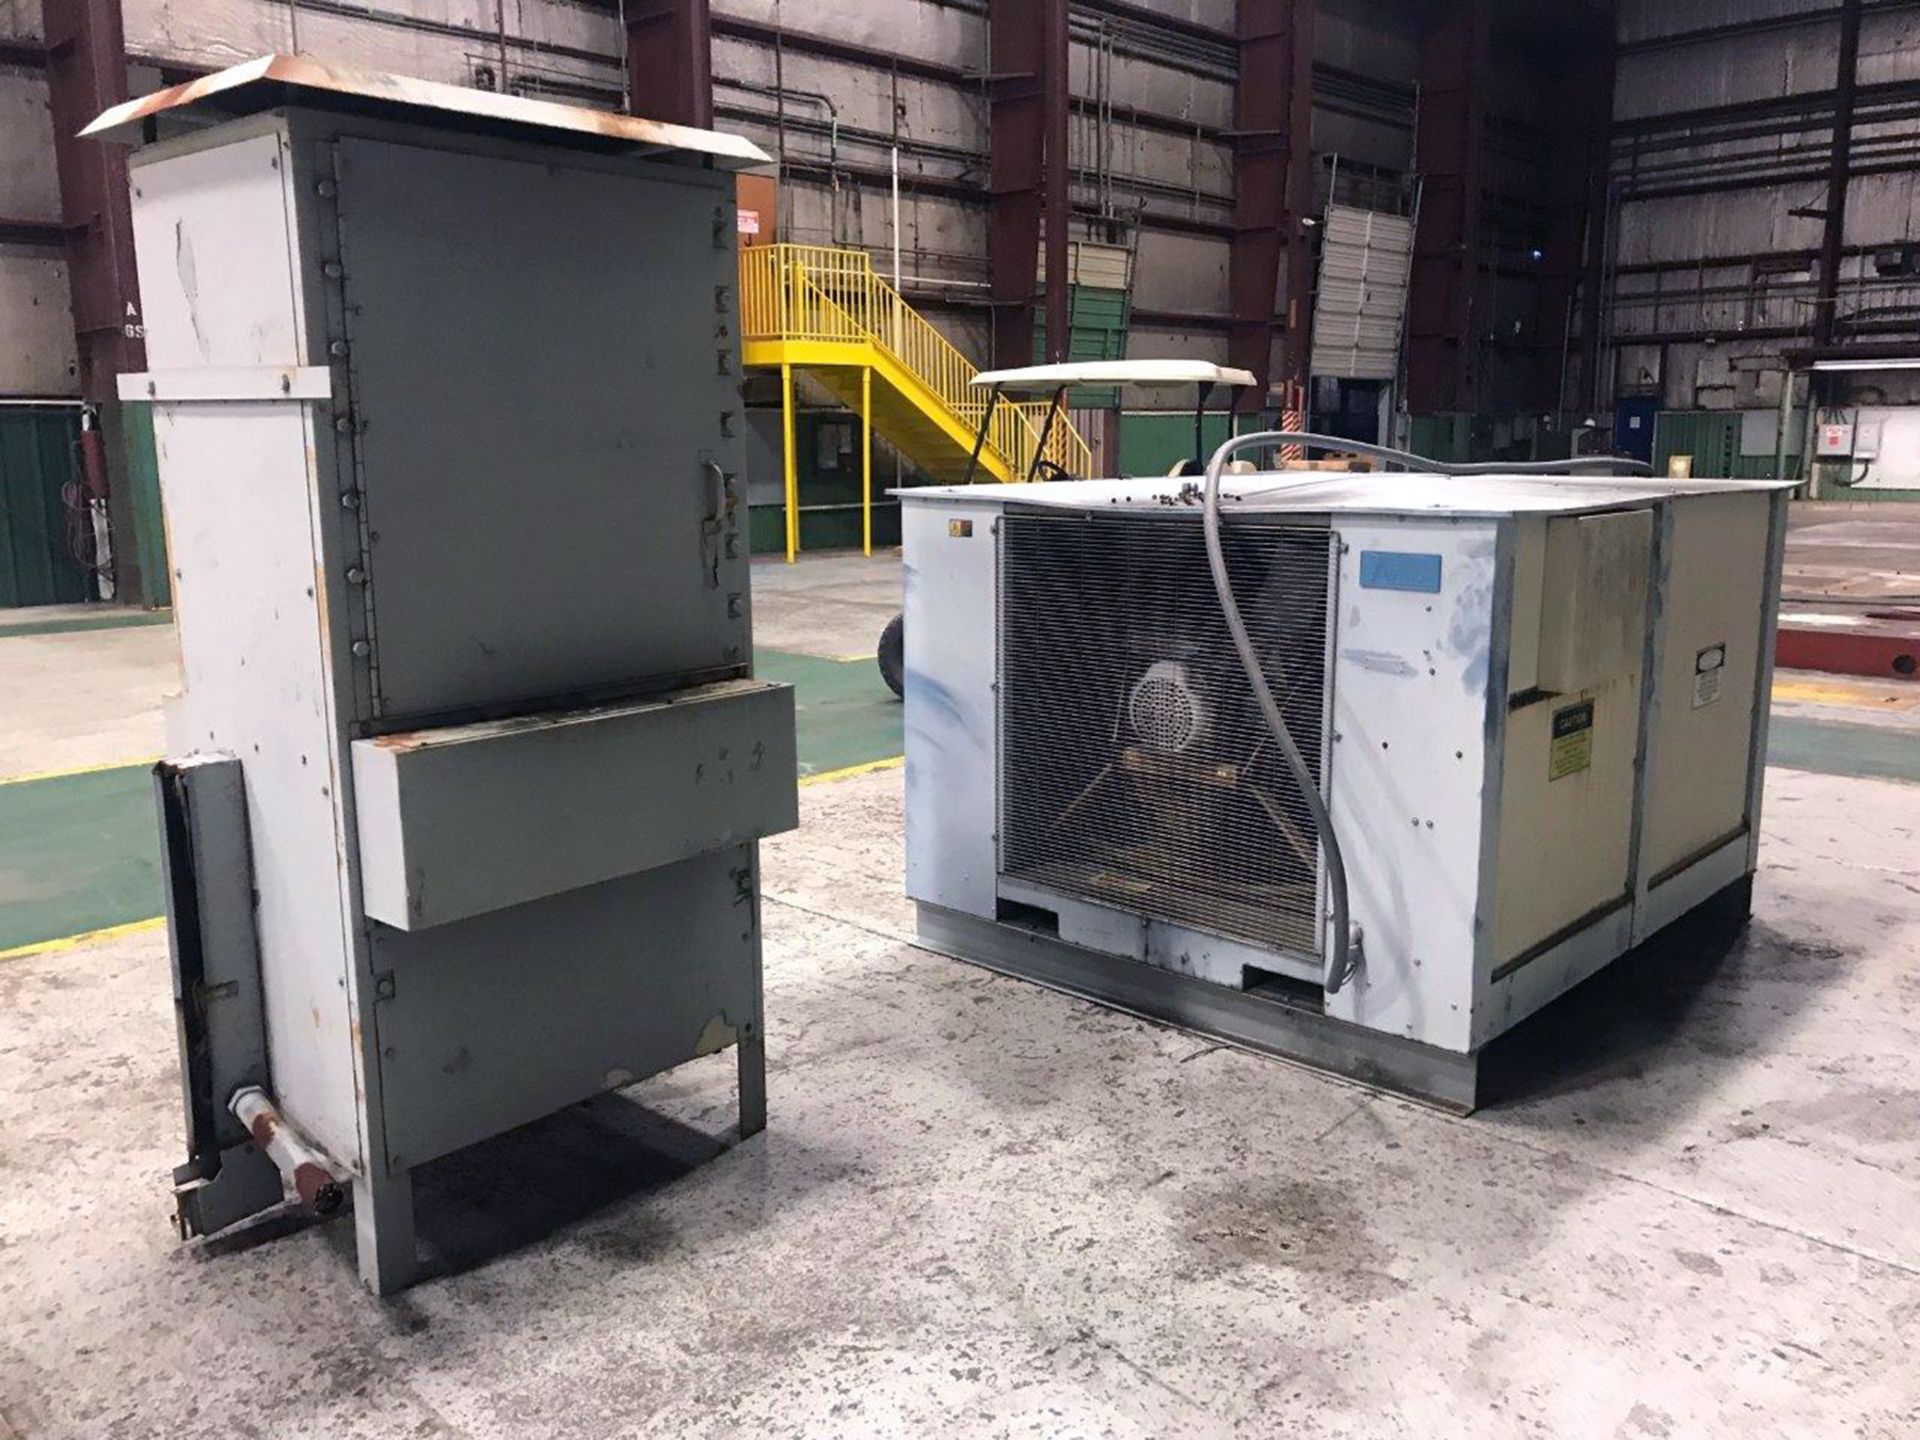 1250 KW Avitron Model K575A Outdoor Resistive Load Bank with Switch Gear - Image 9 of 11